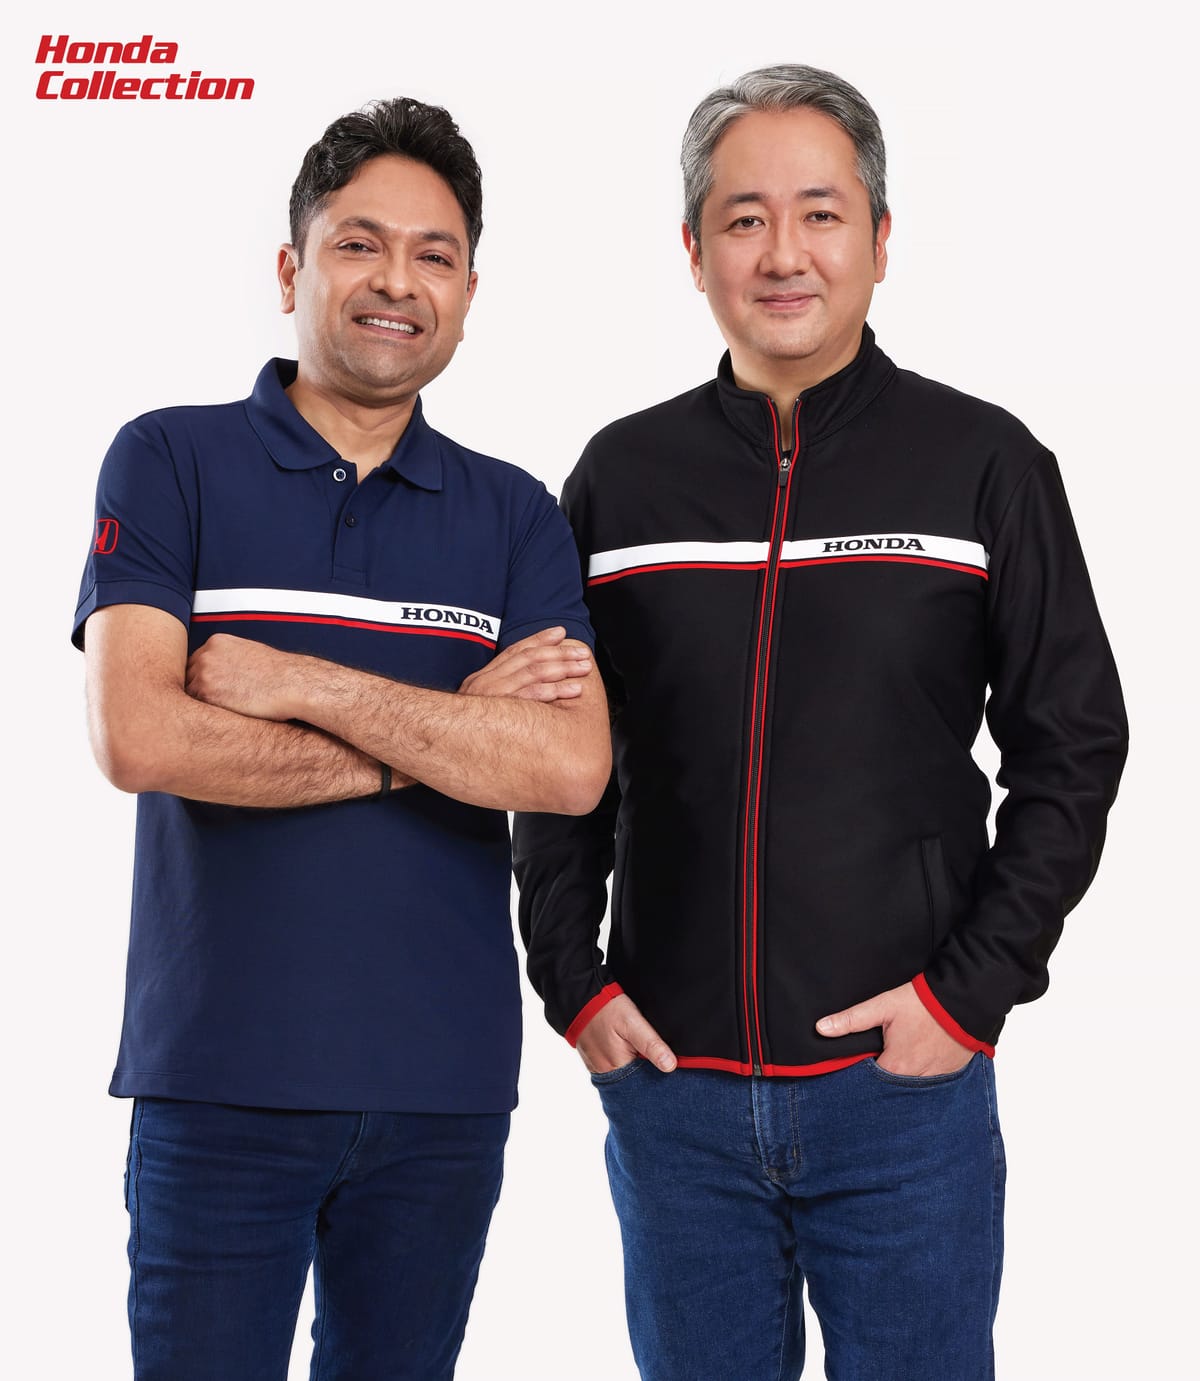 Honda Cars India introduces ‘Honda Collection’ an exclusive range of Merchandise in India